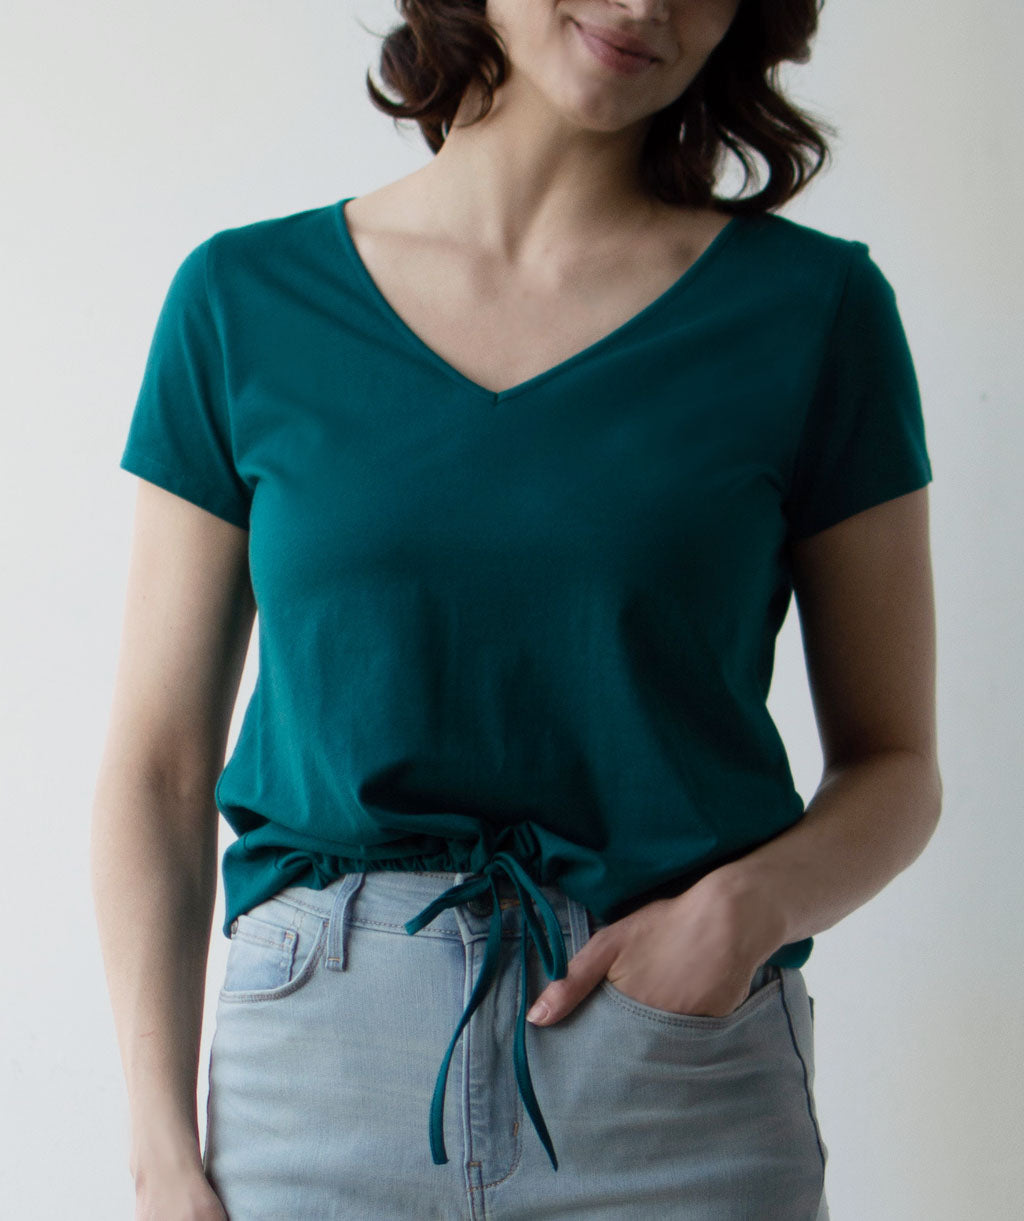 KATILLIA top in Shaded Spruce